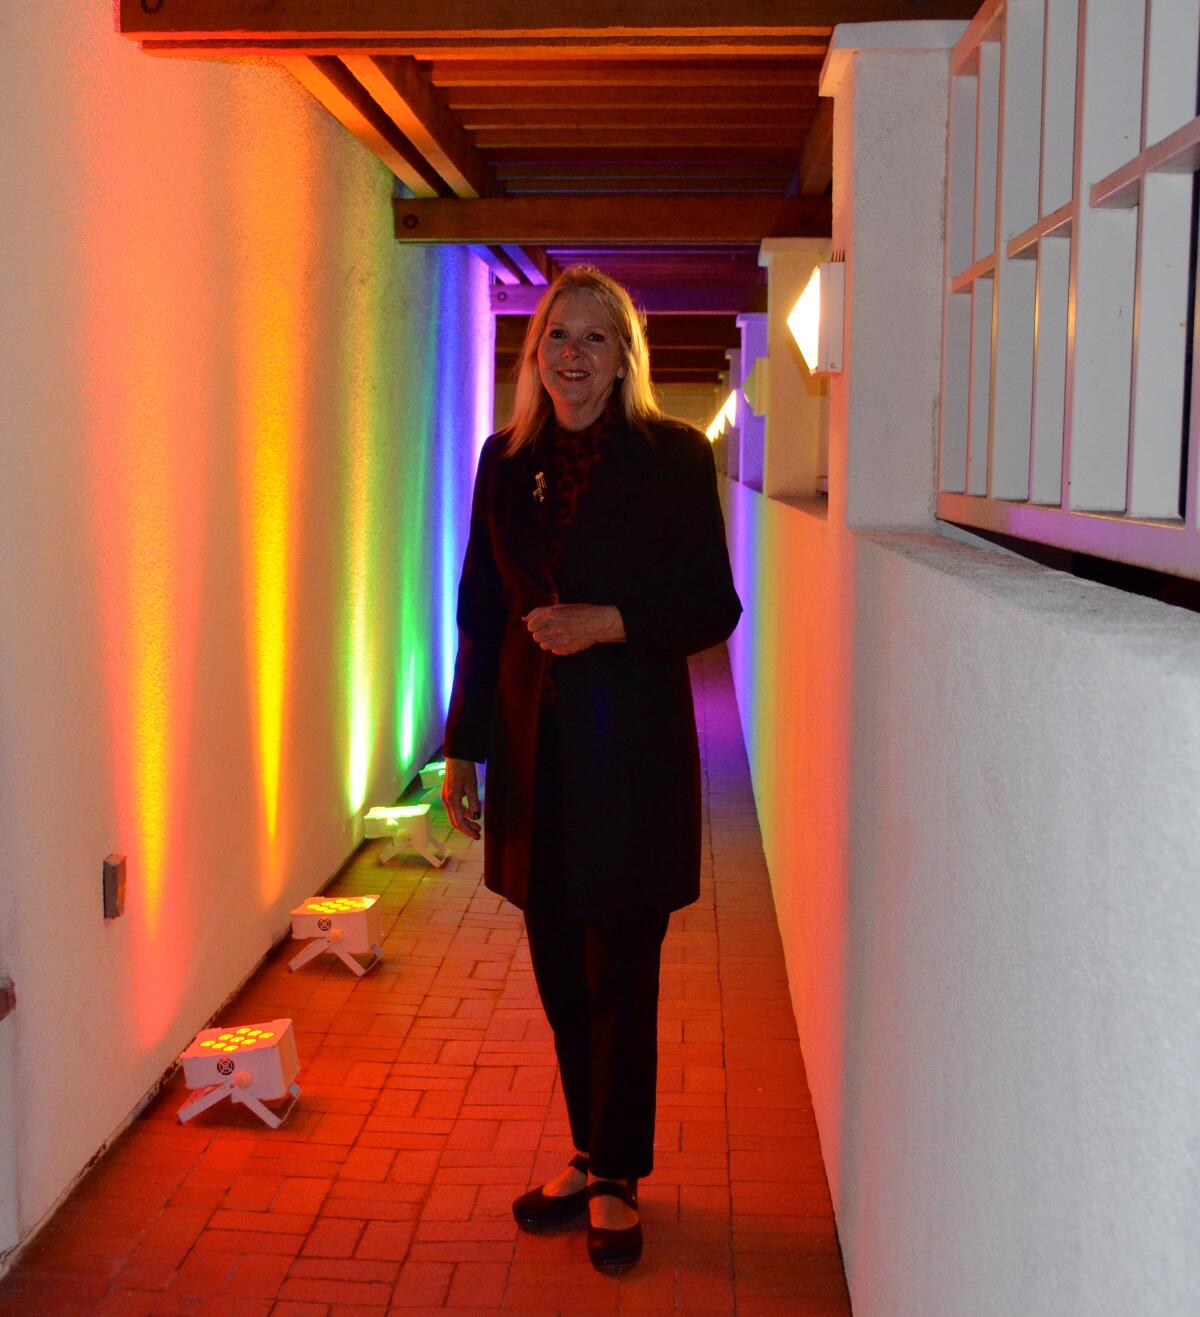 The Rev. Canon Cindy Evans Voorhees stands in front of a rainbow lit wall.